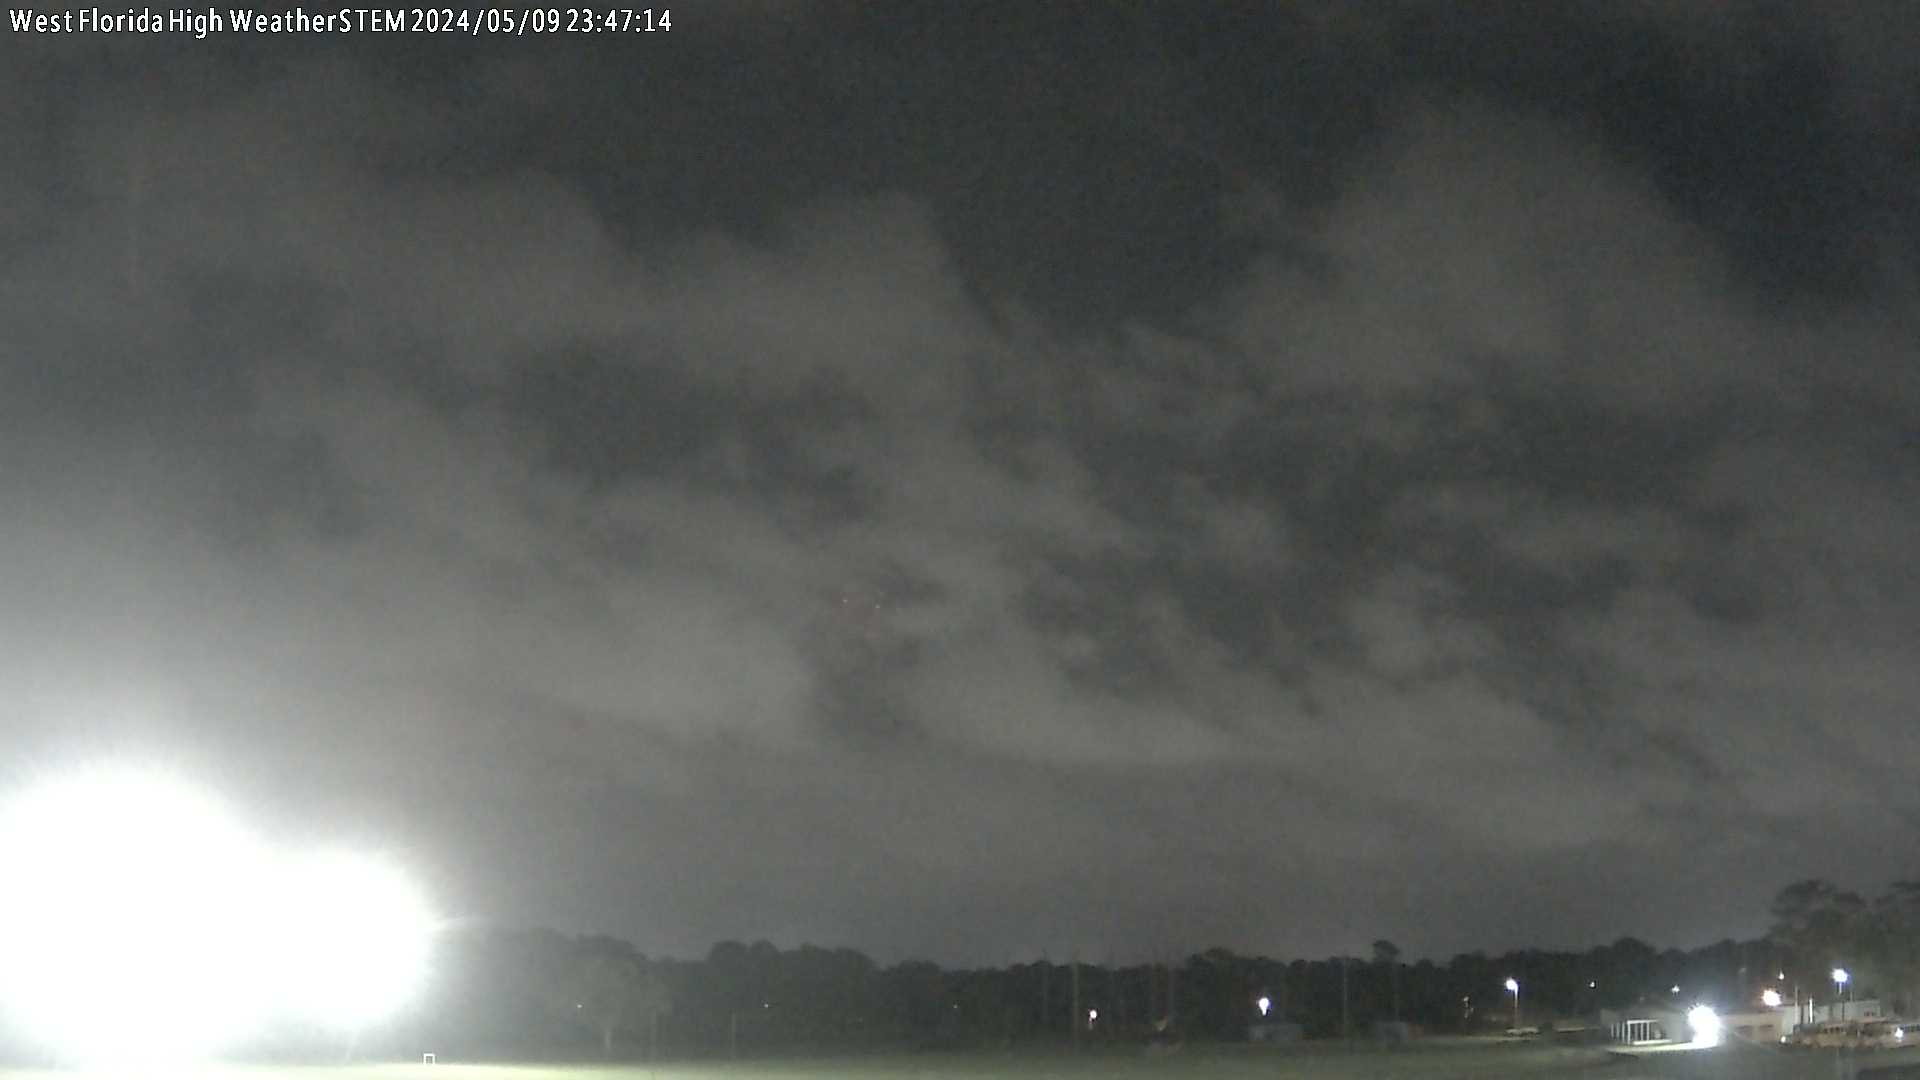  WeatherSTEM Cloud Camera WFHSWxSTEM in Escambia County, Florida FL at West Florida High School